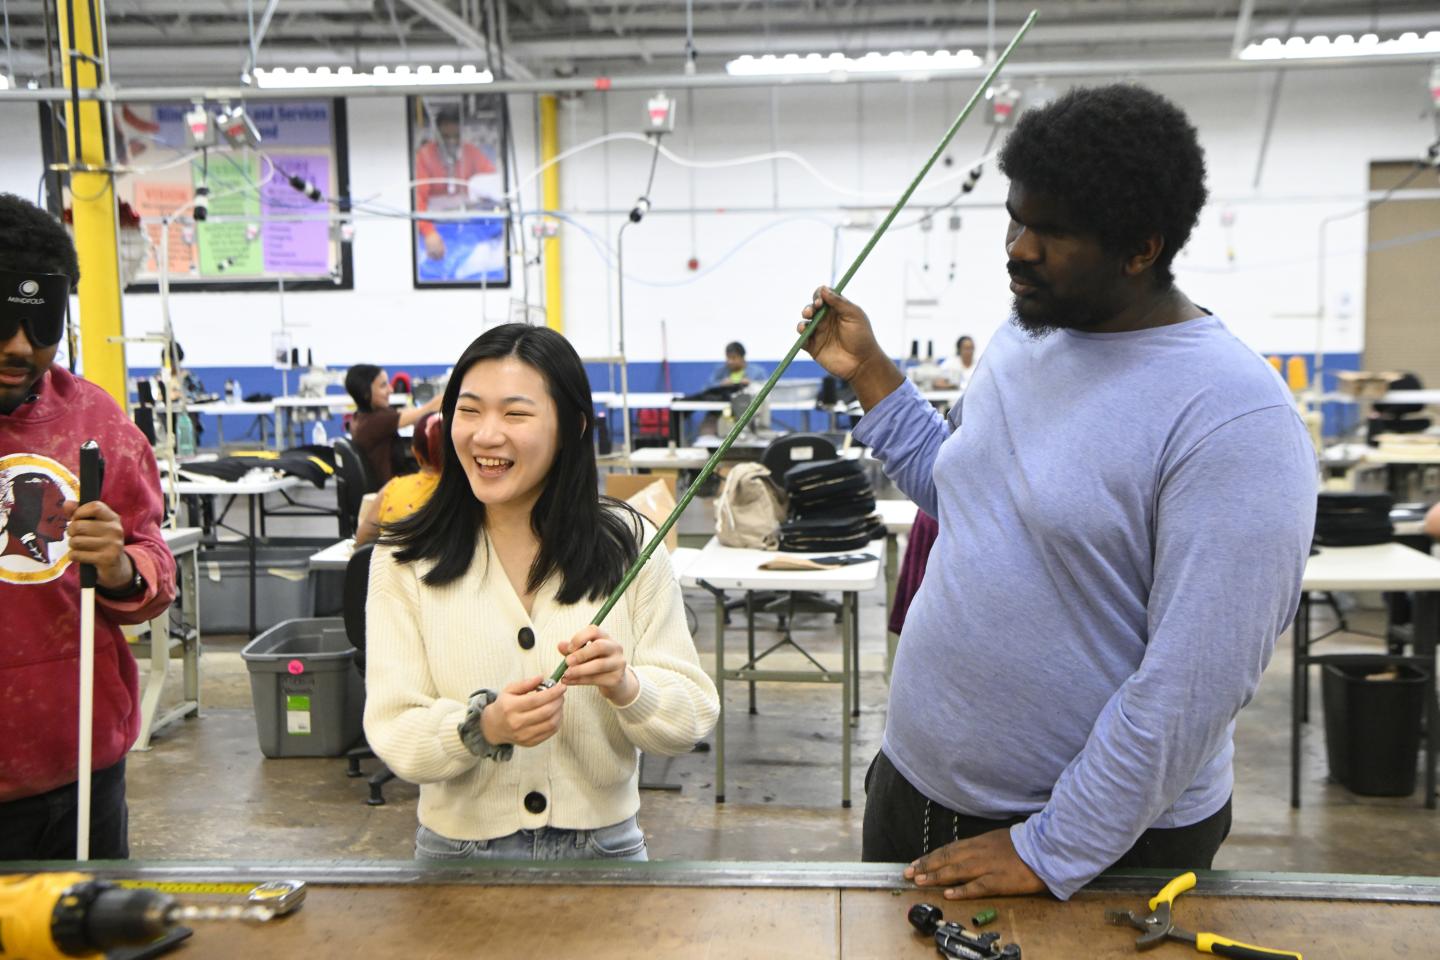 Students work in partnership with blind individuals to make canes. A student in a white sweater holds up a cane made from a green tomato stake while a blind associate at Blind Industries and Services of Maryland learns how to make the cane.